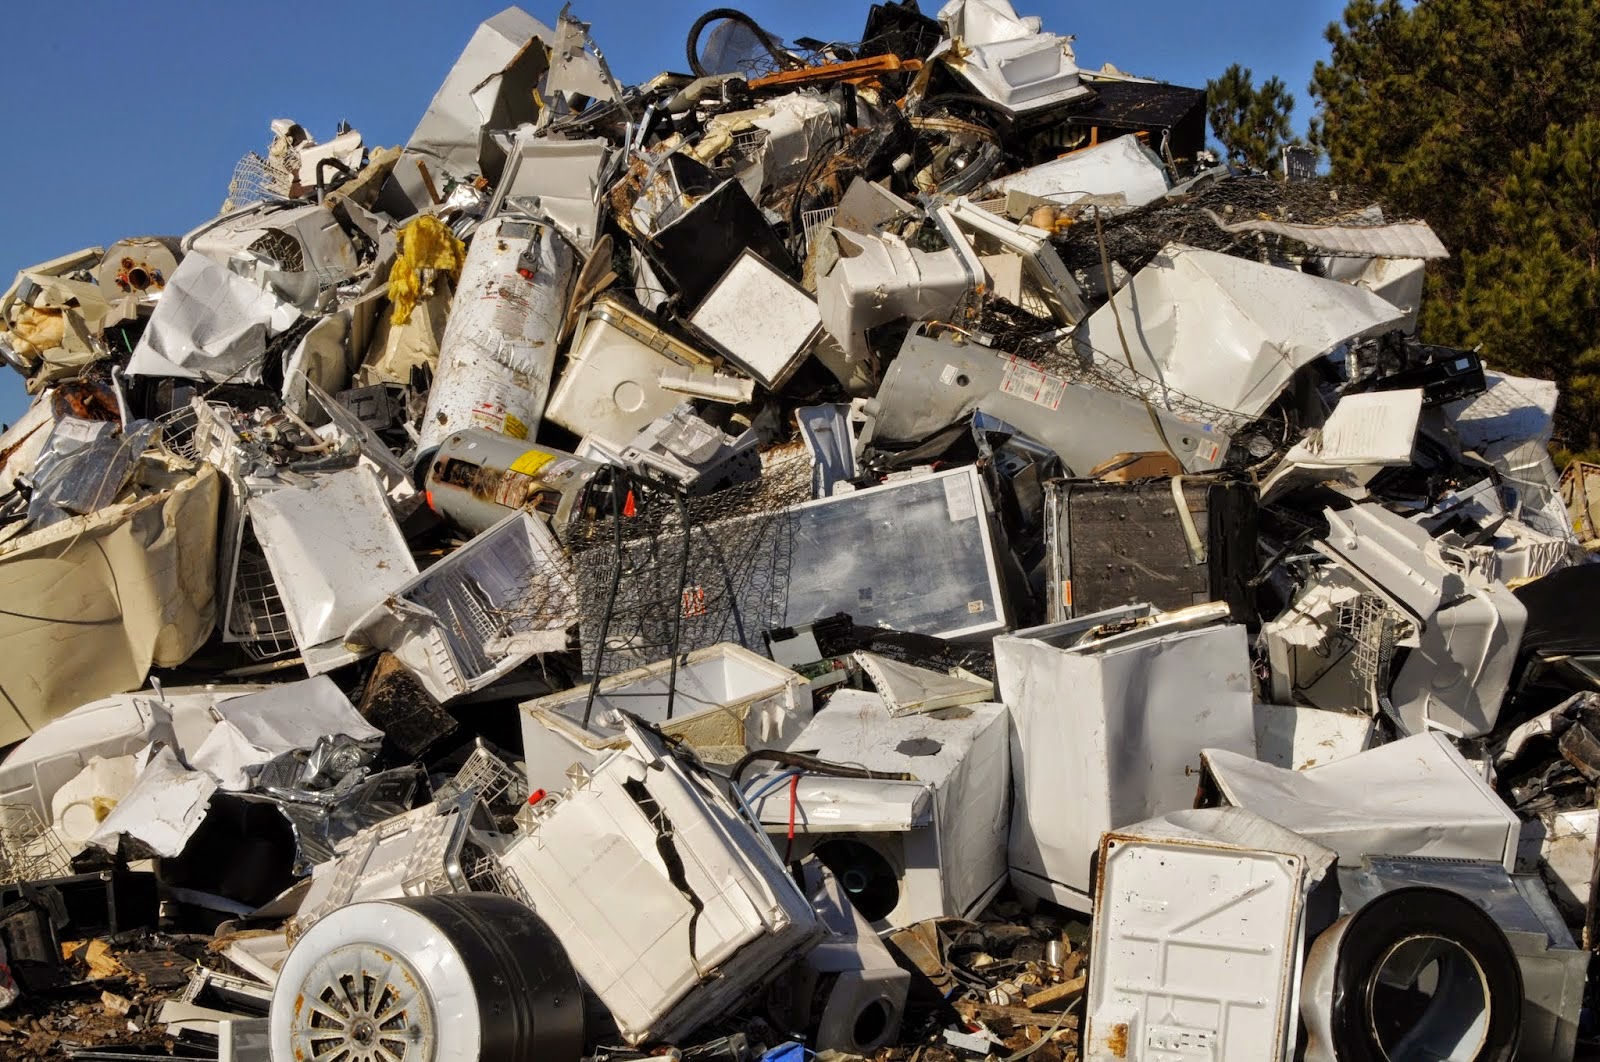 wilson-nc-scrap-metal-recycling-copper-aluminum-grt-prices-for-junk